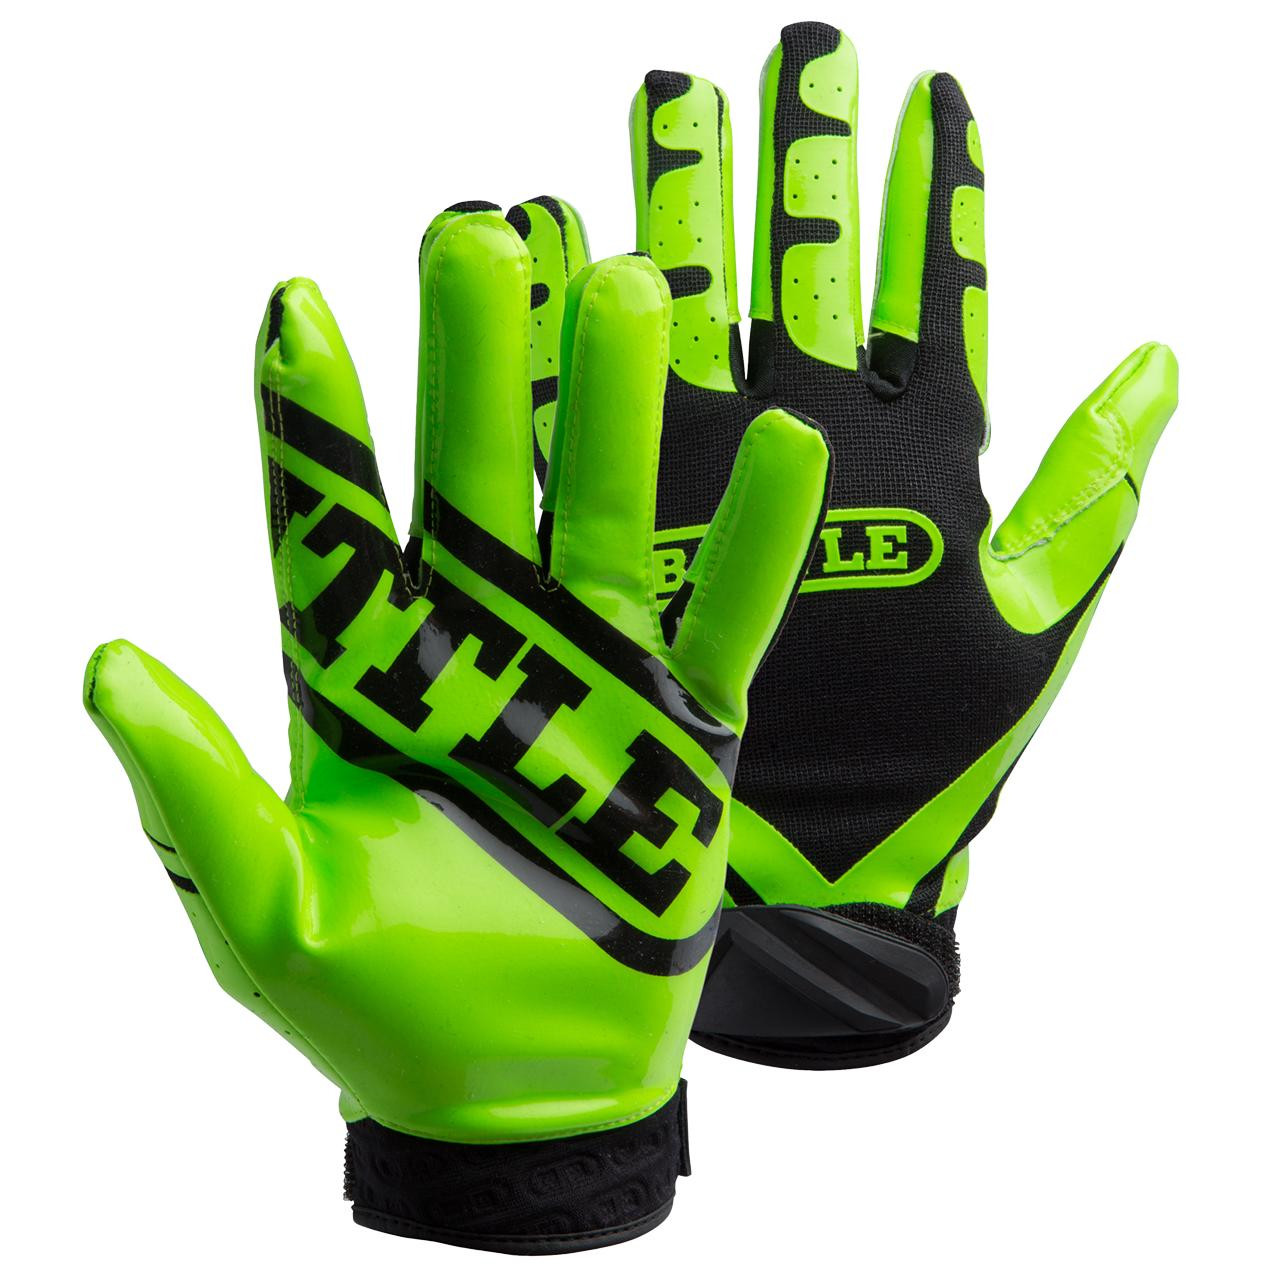 Ultra-Stick Receiver Football Gloves - Adult & Youth